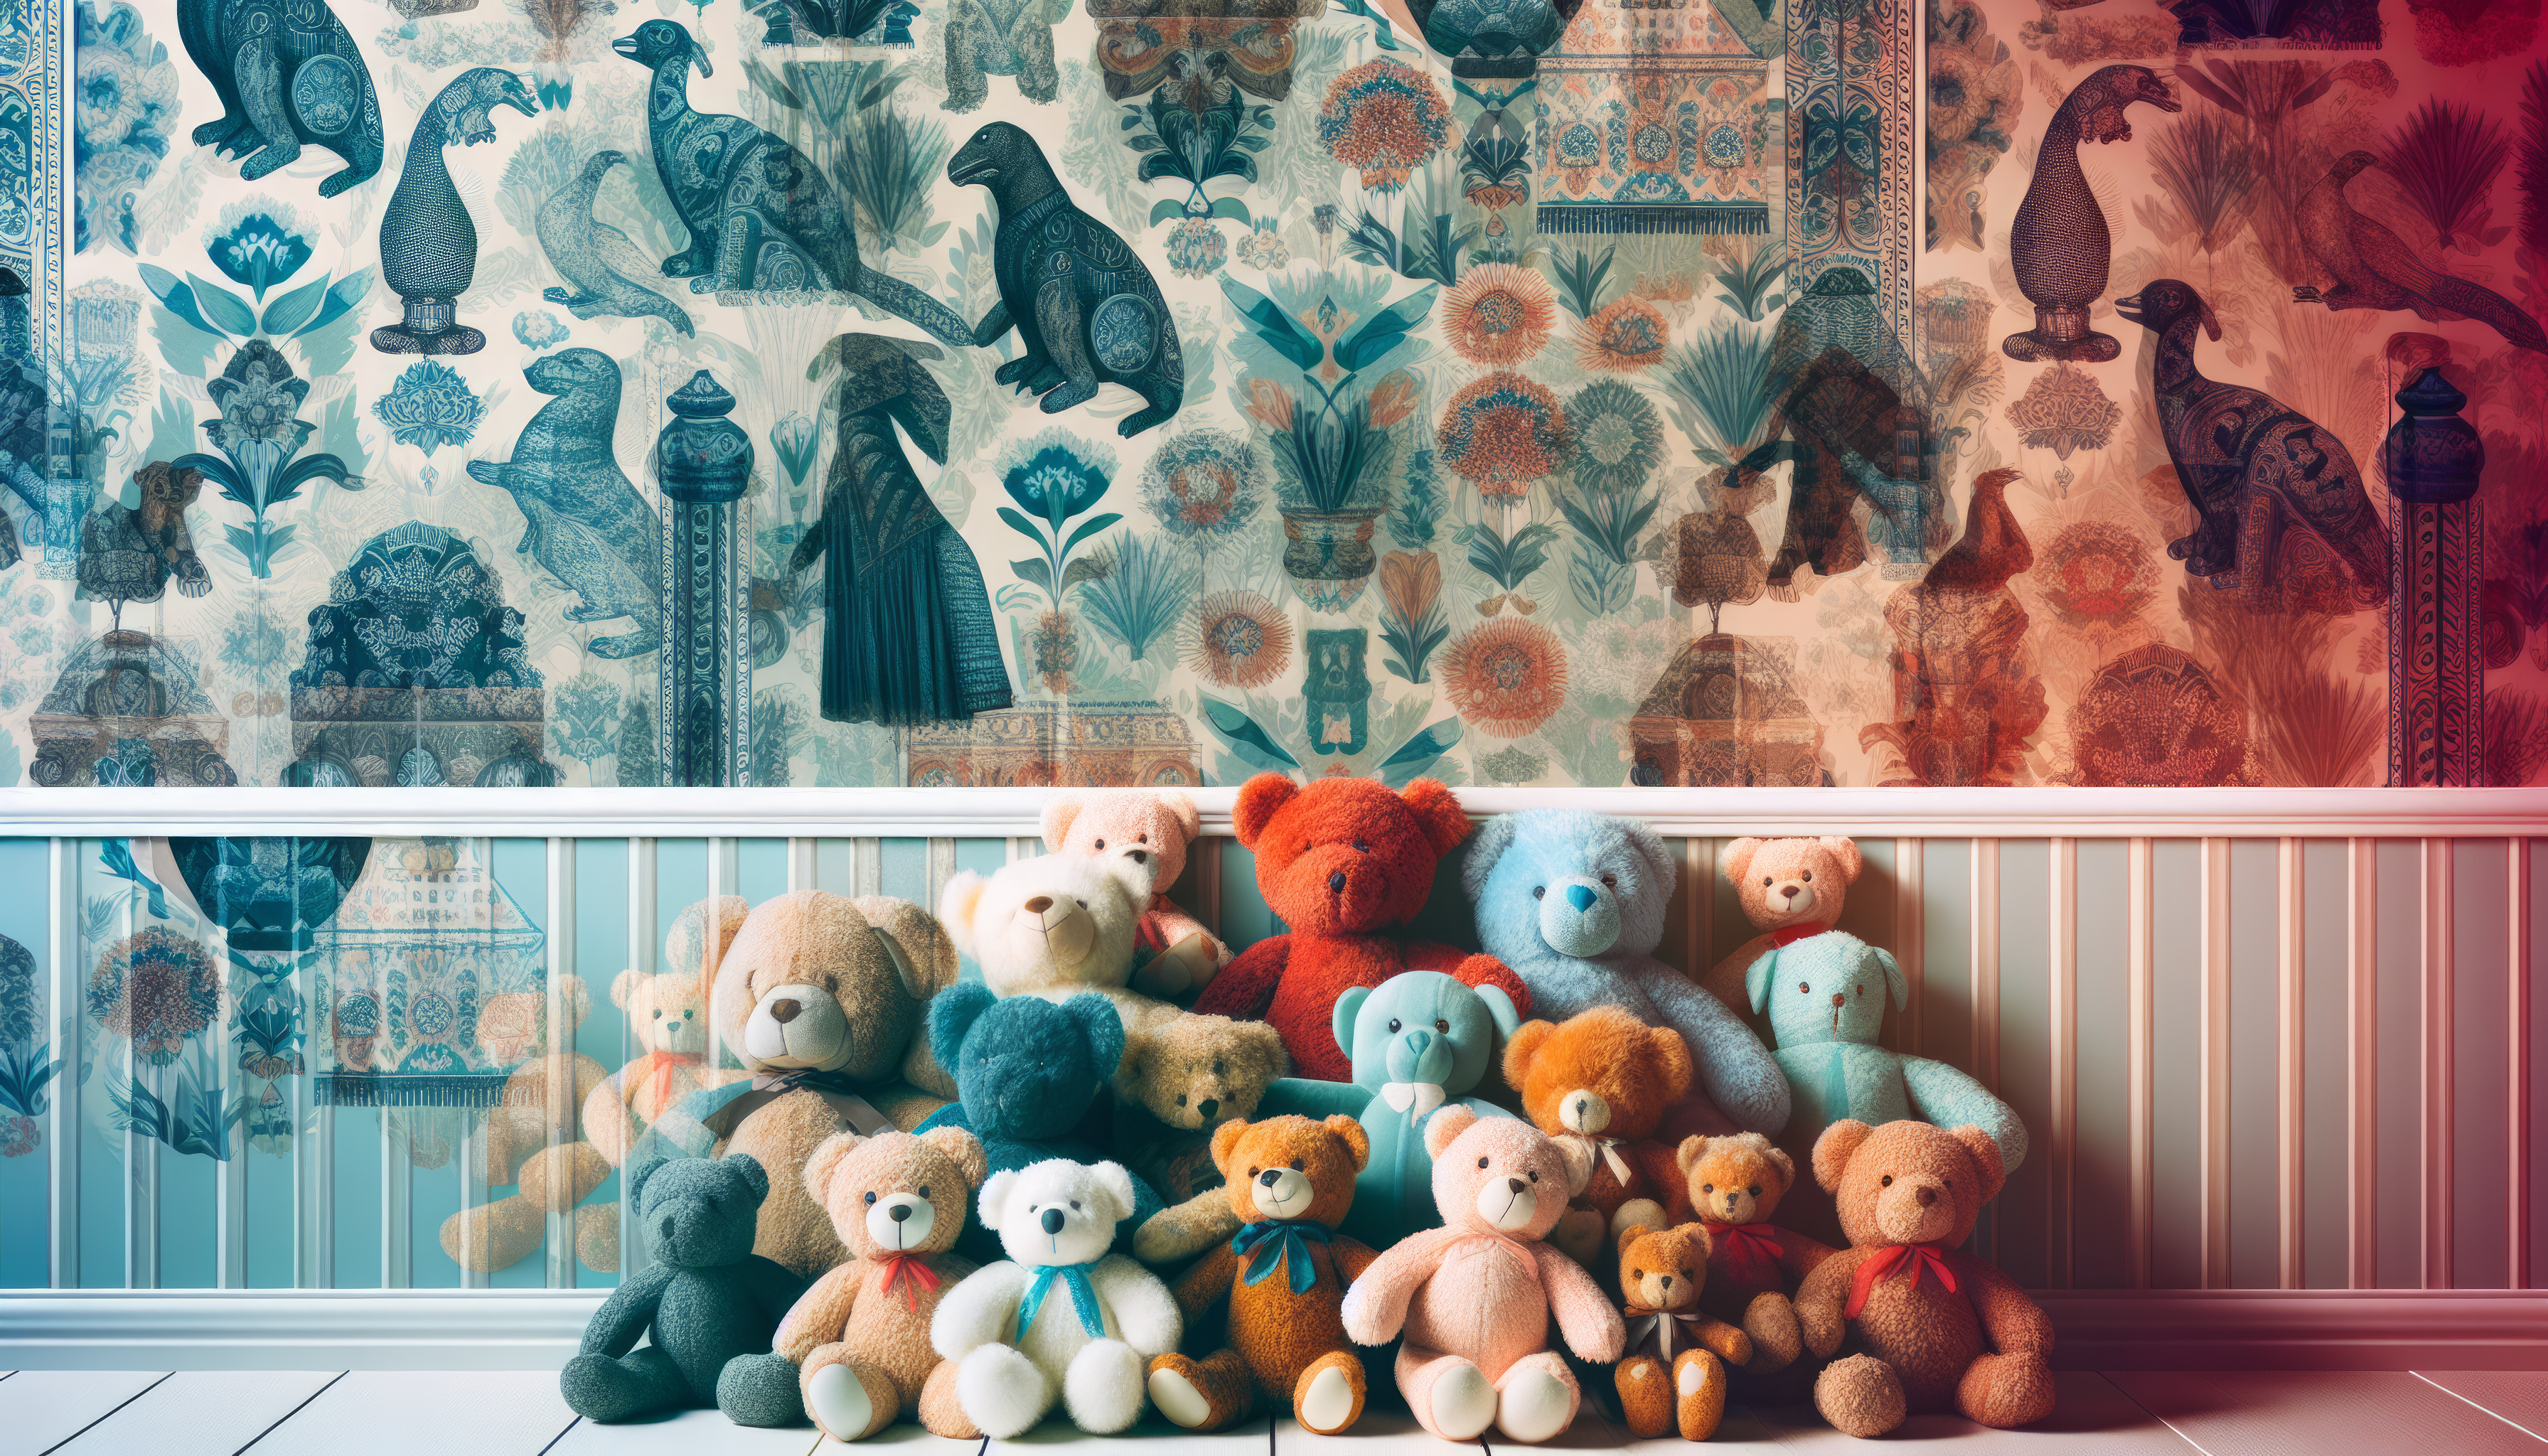 A collection of colorful stuffed teddy bears in front of a vintage bird pattern wallpaper, ideal for HD desktop background.